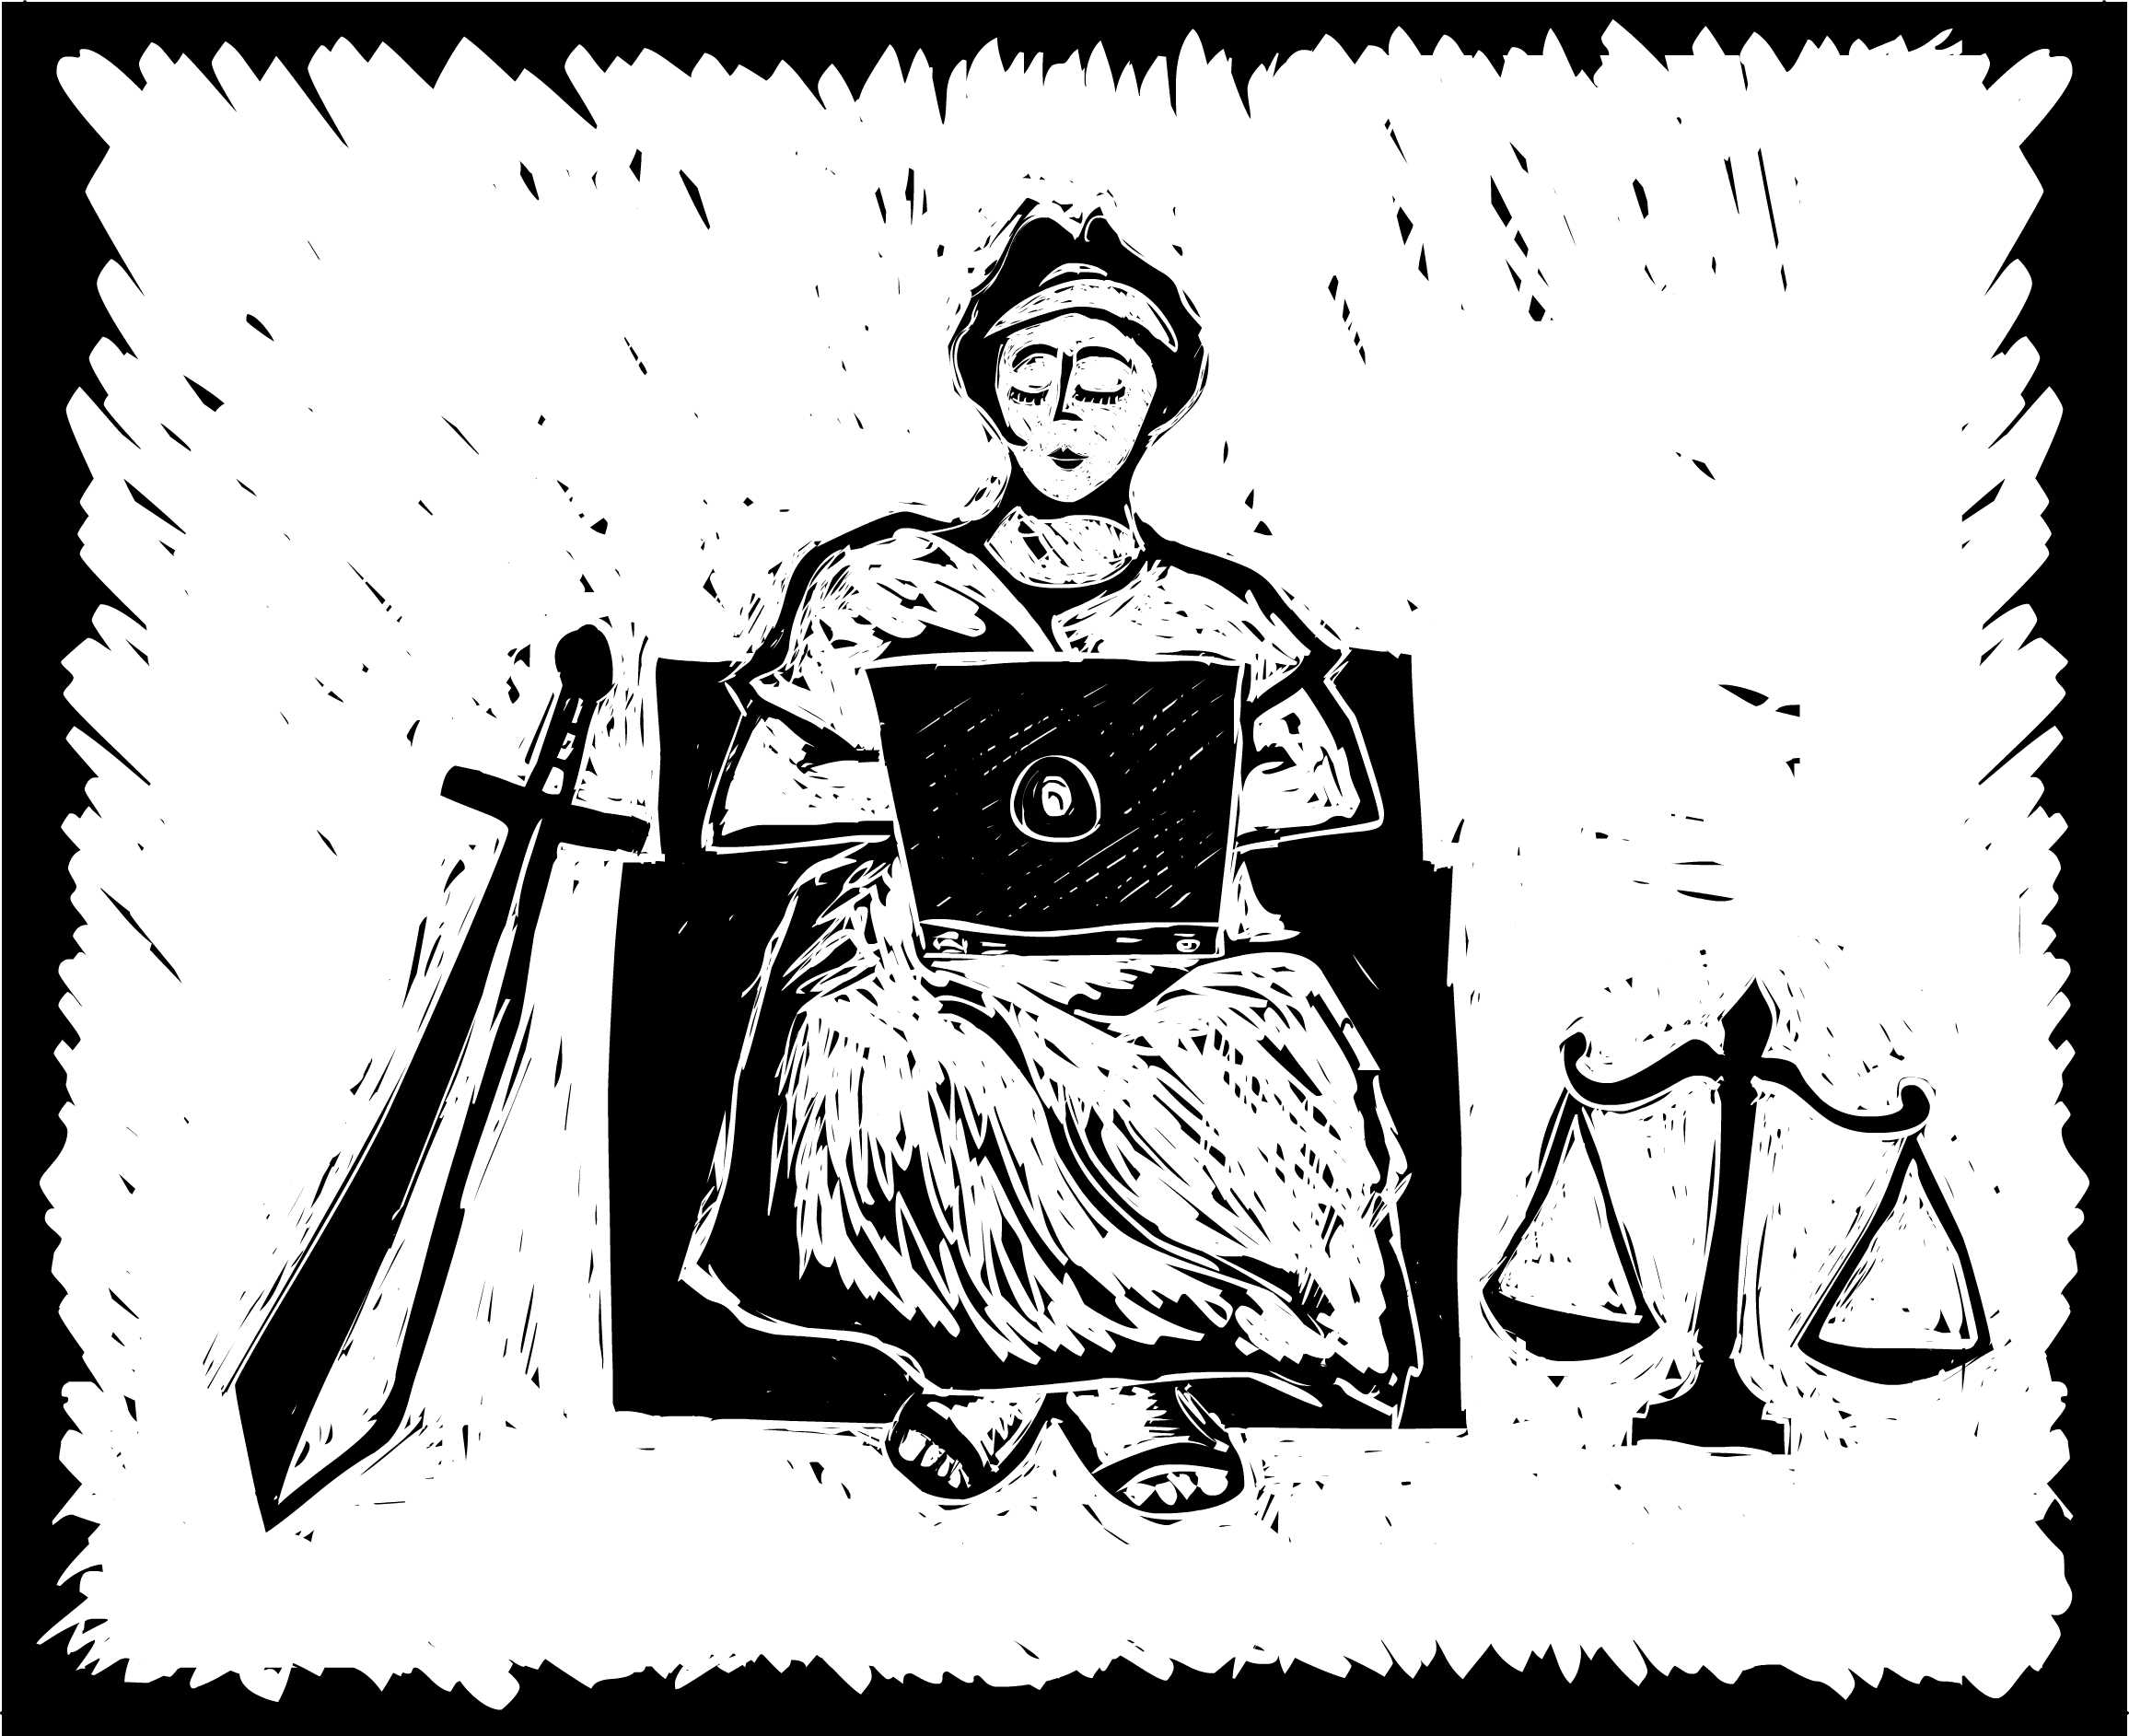 This image depicts lady justice sitting in a chair with a laptop on her lap. A sword appears to her left and the set of scales appear to her right. The image is in the style of a woodcut.